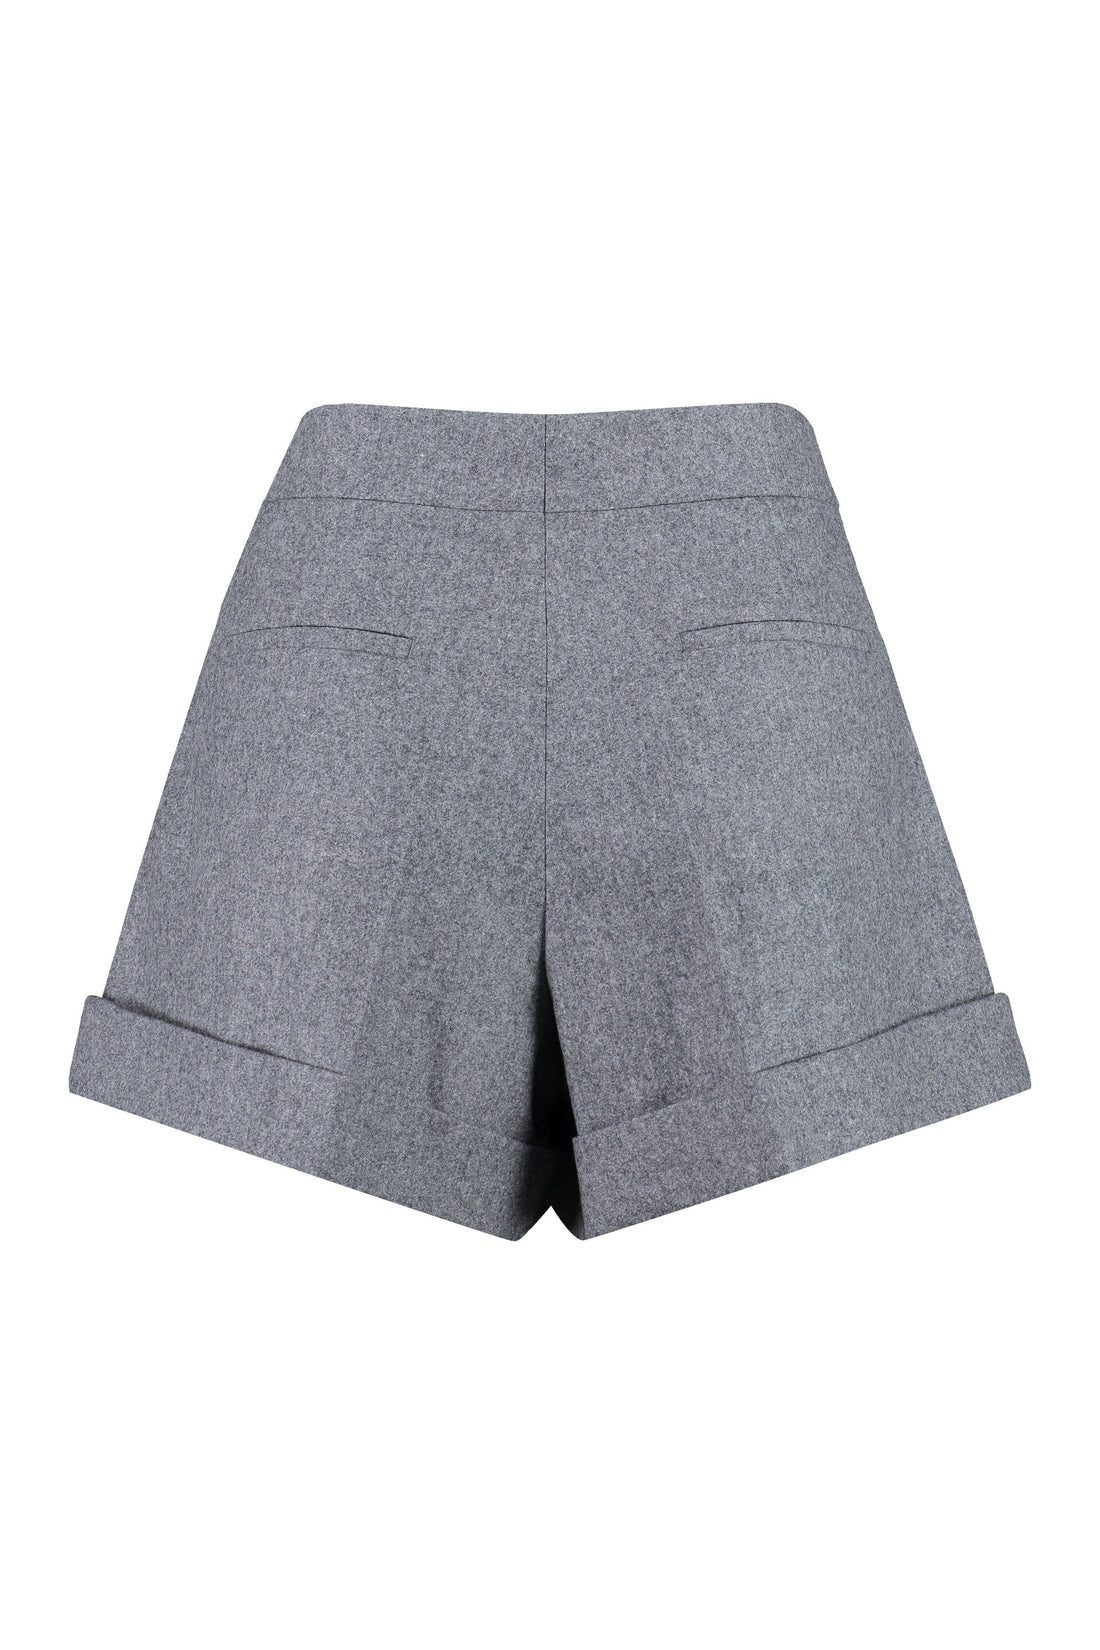 Givenchy-OUTLET-SALE-High waist wool shorts-ARCHIVIST